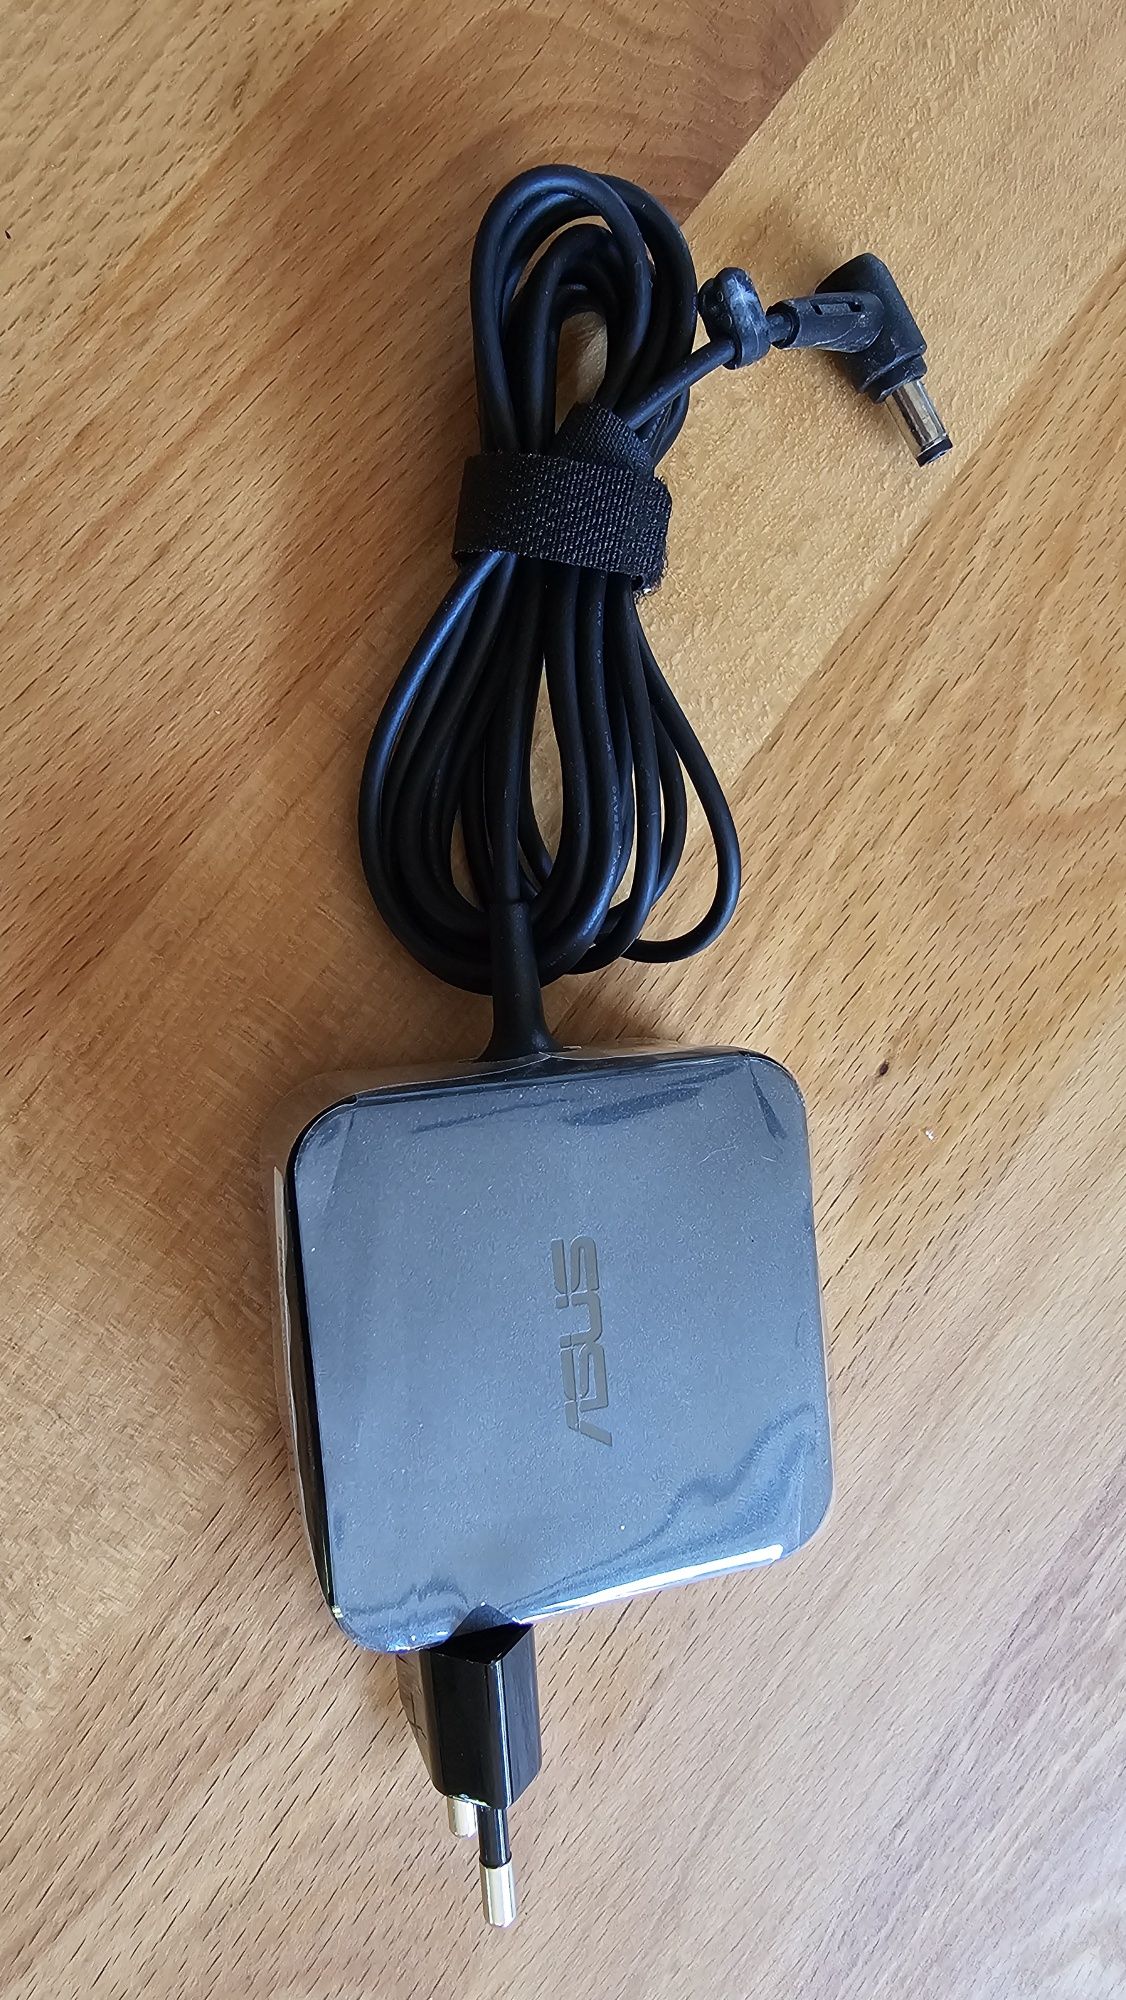 Router ASUS RT-AX88U